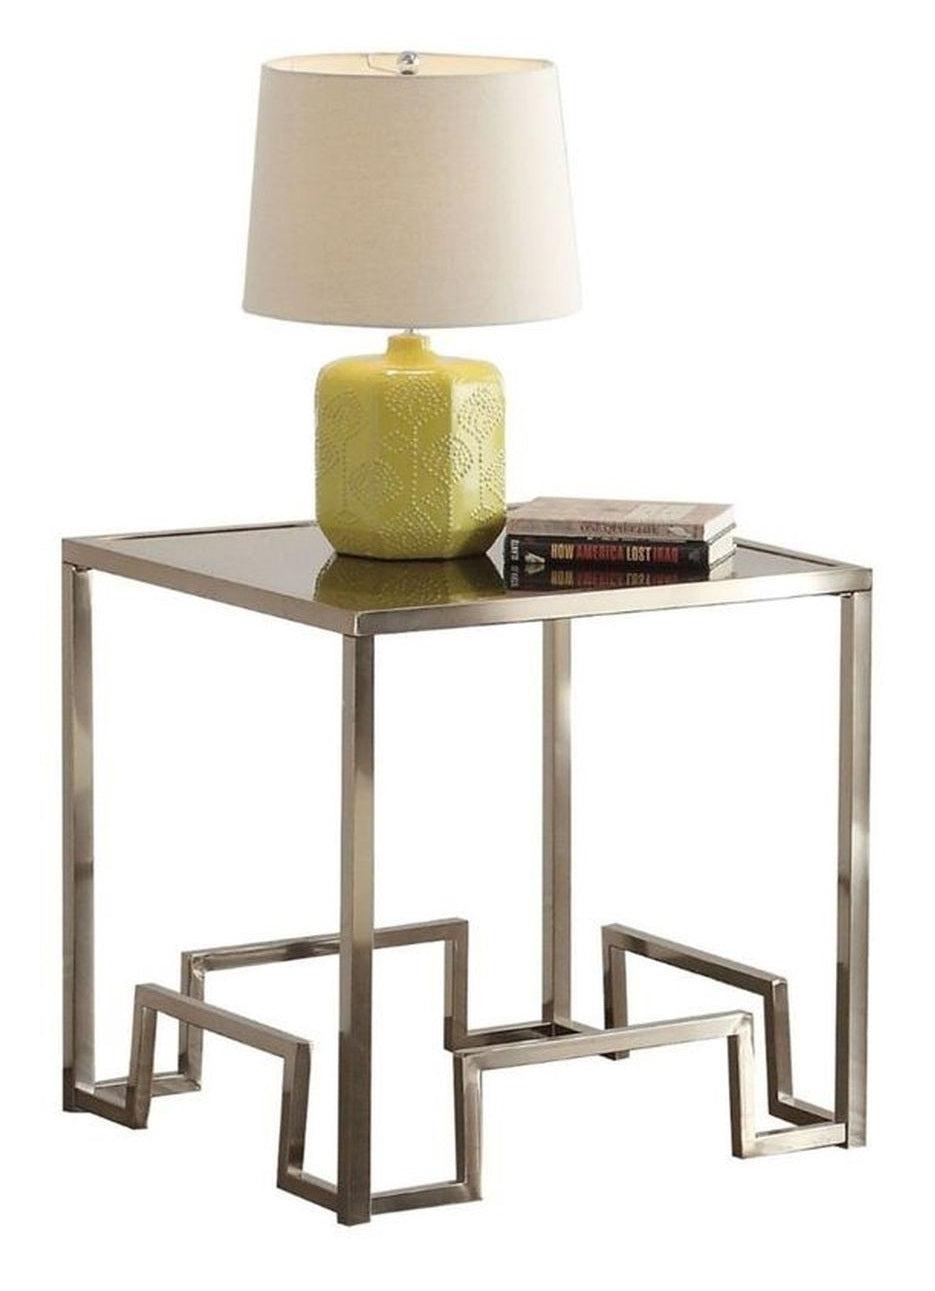 Acme Damien End Table in Champagne 81627